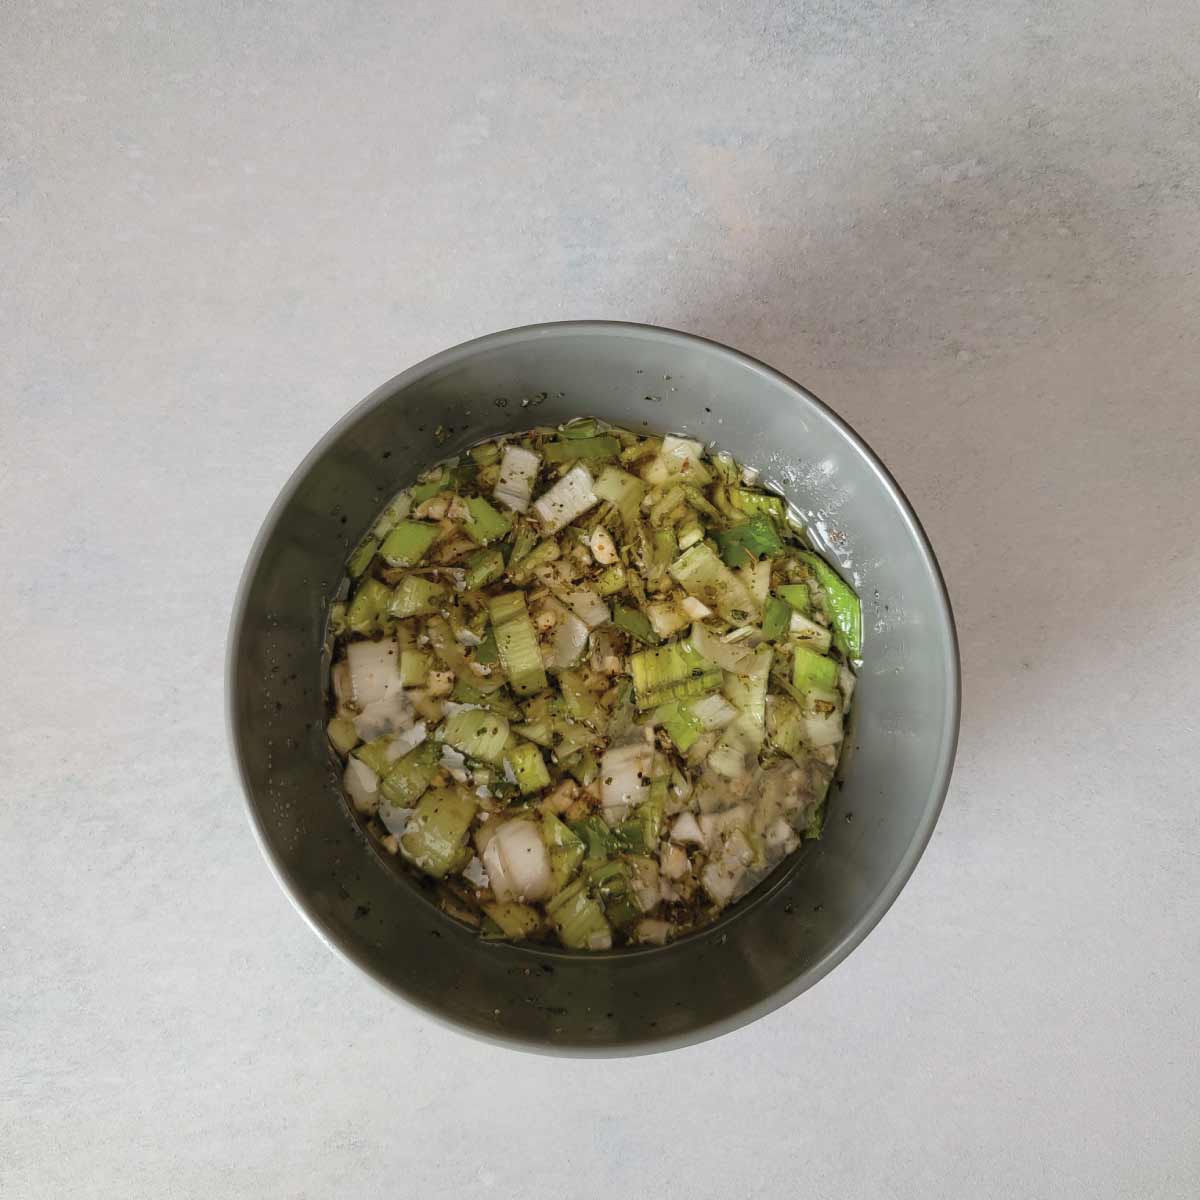 Dressing prepared in a small prep bowl ready to use.